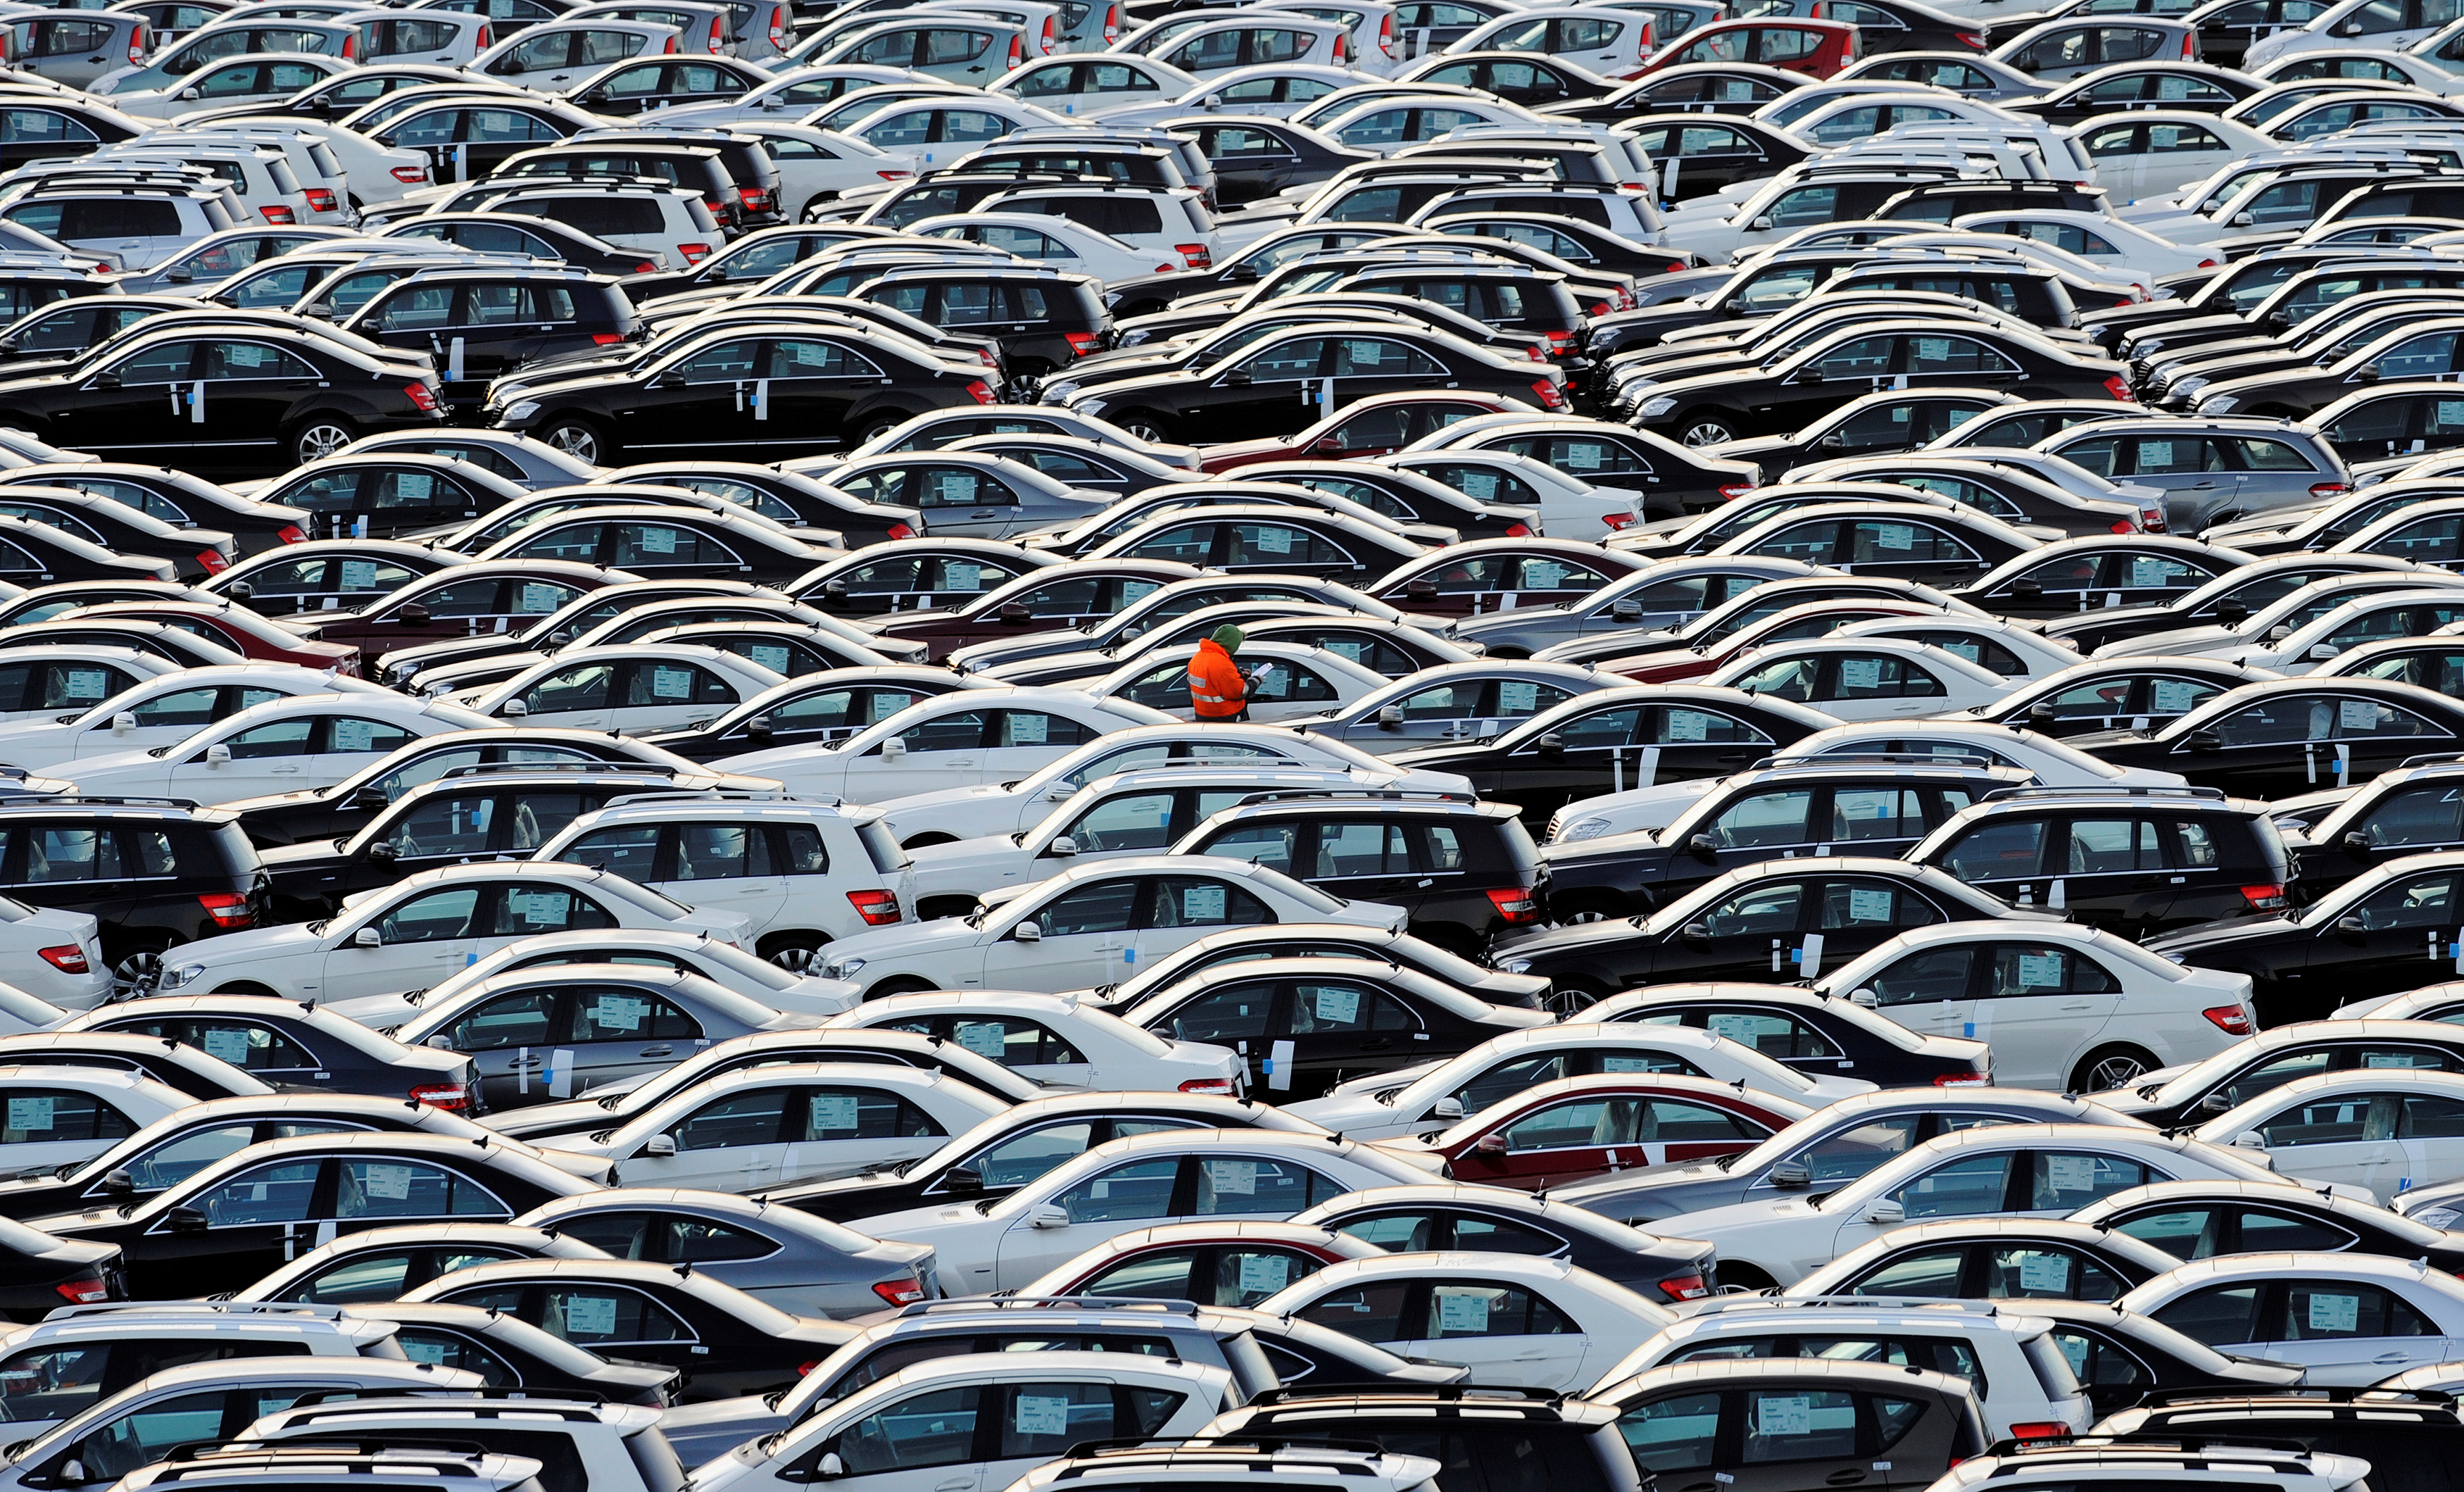 A worker walks along rolls of Mercedes cars at a shipping terminal in the harbor of the town of Bremerhaven